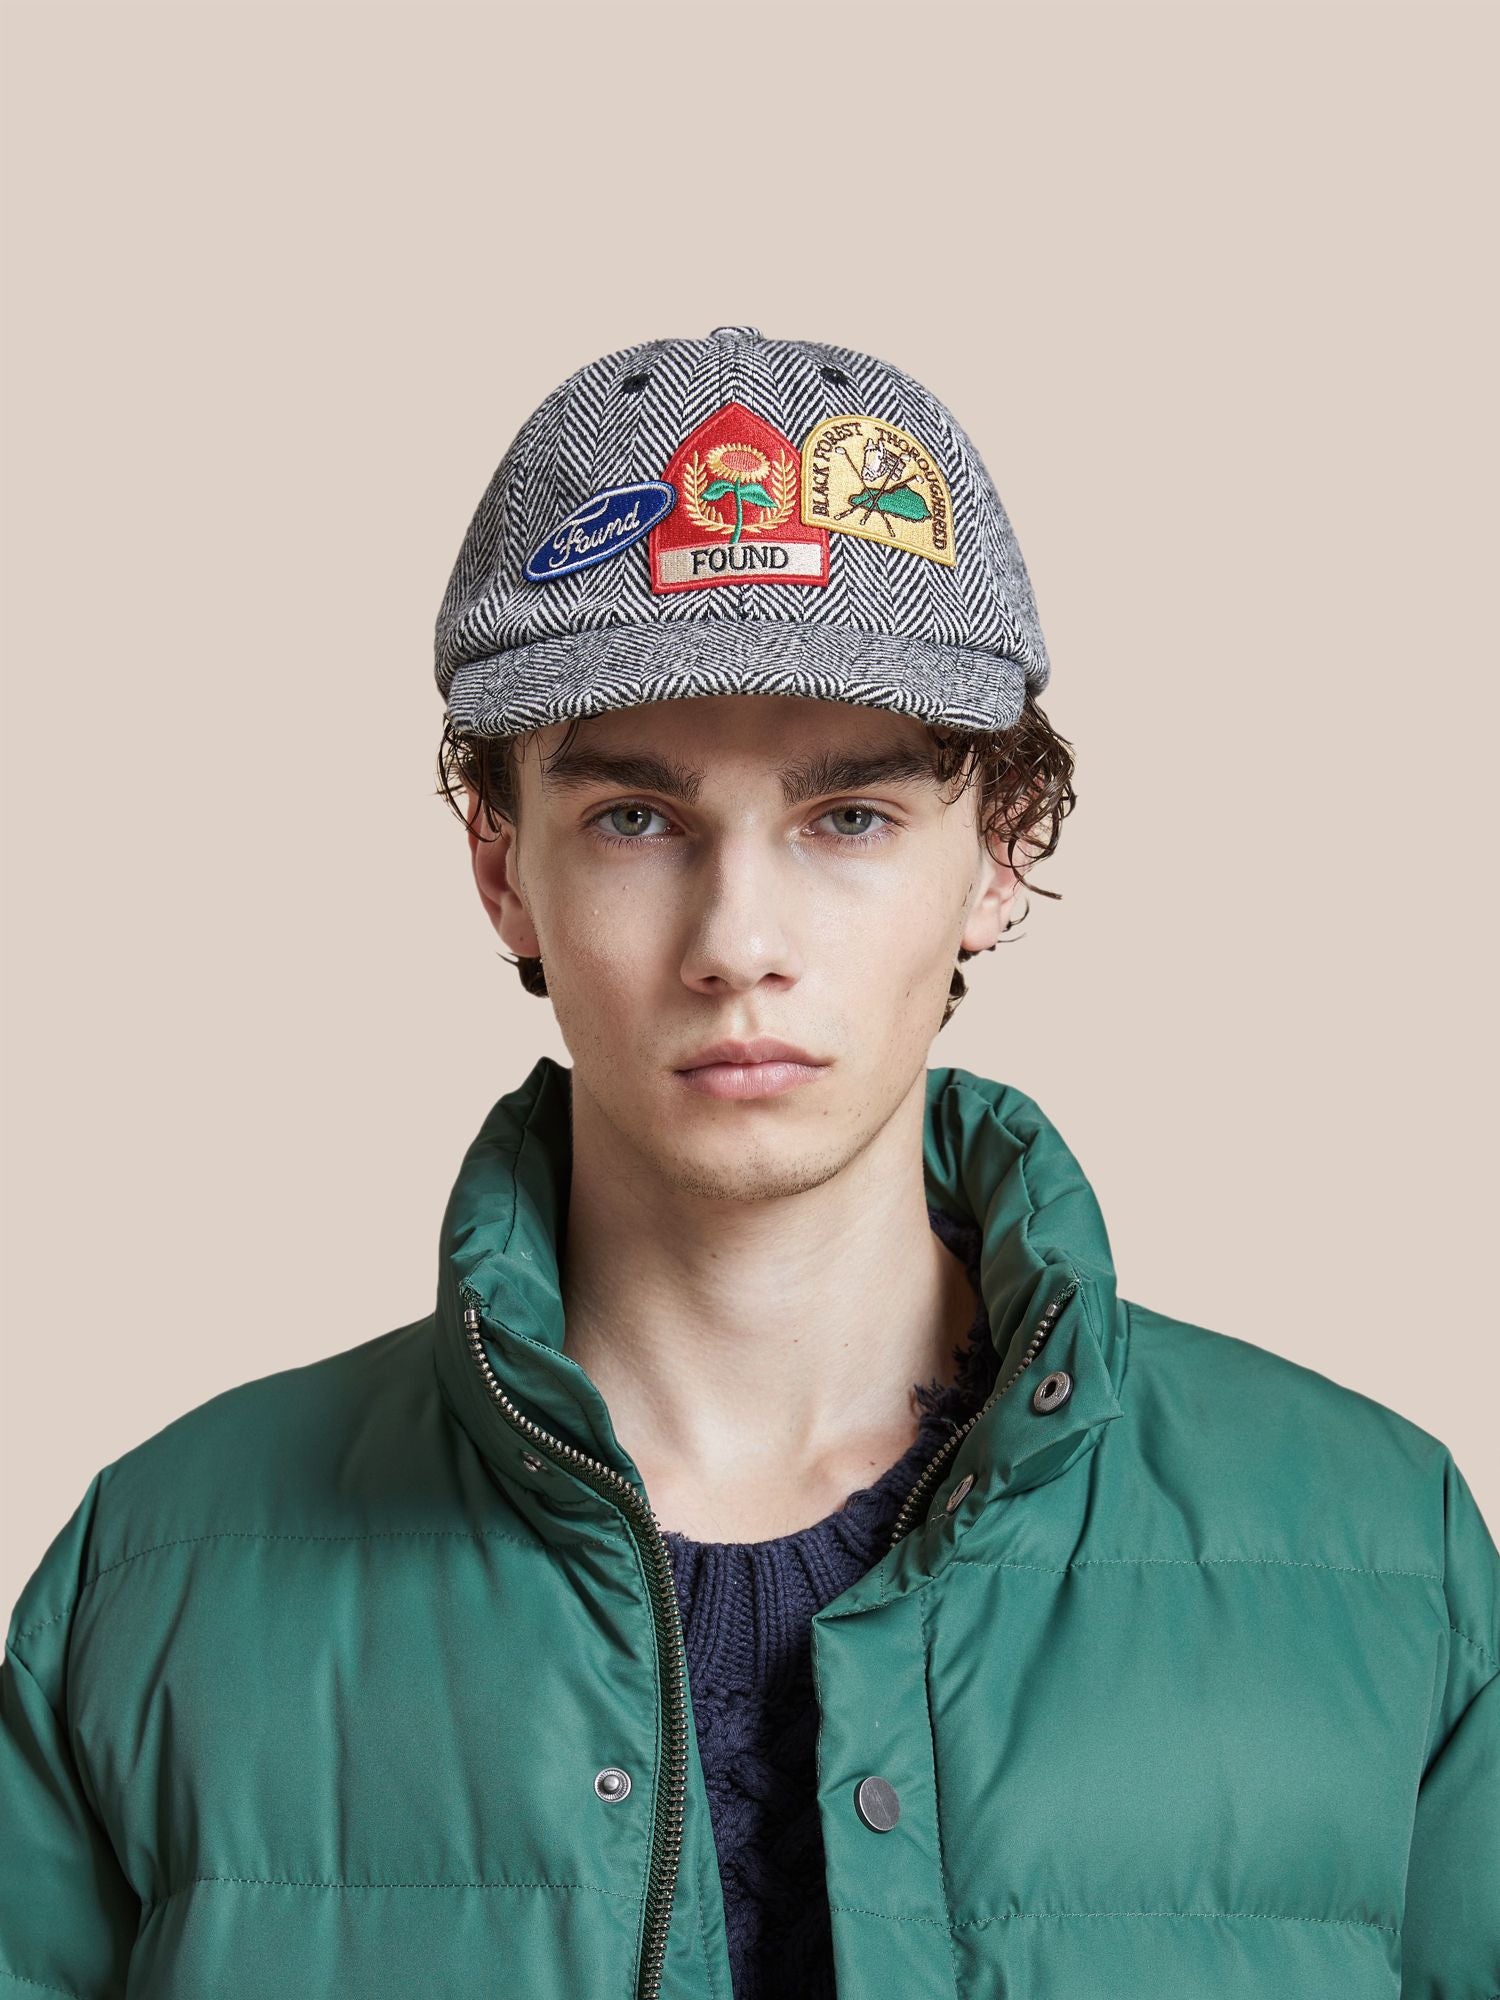 Young man with curly hair wearing a Found Herringbone Tweed Patch Cap and a green jacket, looking directly at the camera against a neutral background.